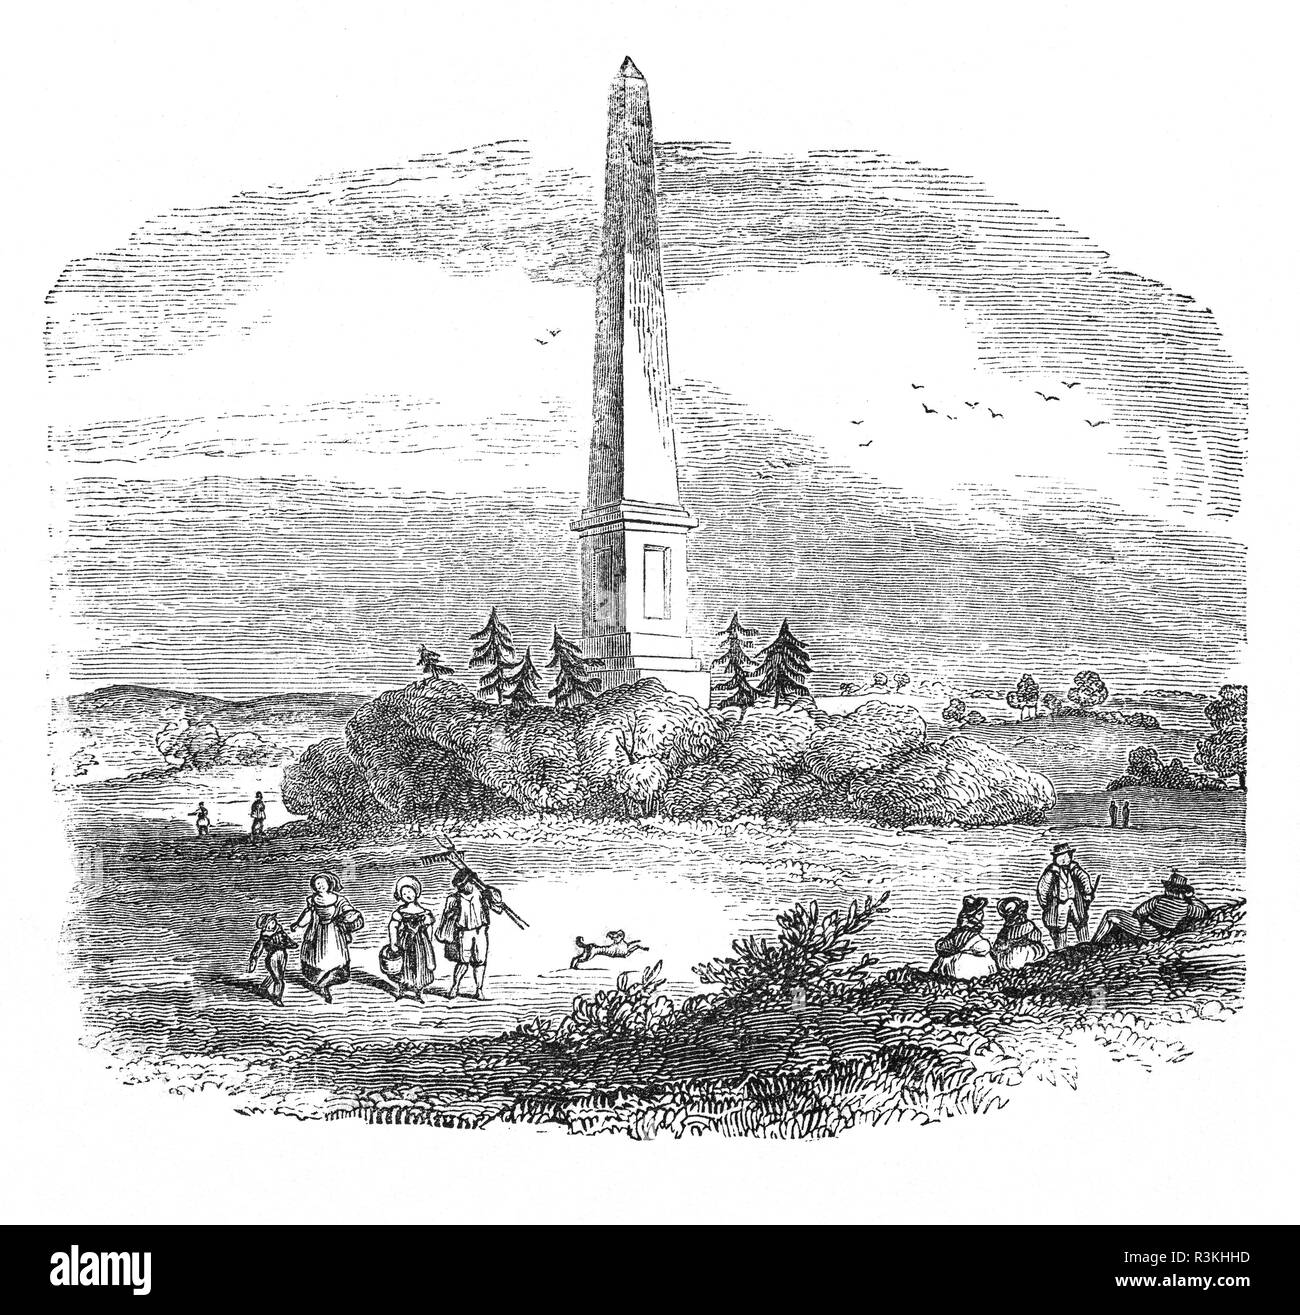 An obelisk marking the site of the Battle of Naseby by Oliver Cromwell to William Lenthall, an English politician who served as Speaker of the House of Commons. The battle was a decisive engagement of the English Civil War, fought on 14 June 1645 between the main Royalist army of King Charles I and the Parliamentarian New Model Army, commanded by Sir Thomas Fairfax and Oliver Cromwell. King Charles I lost the bulk of his veteran infantry and officers, artillery and stores, his personal baggage and many arms, ensuring the Royalists would never again field an army of comparable quality. Stock Photo